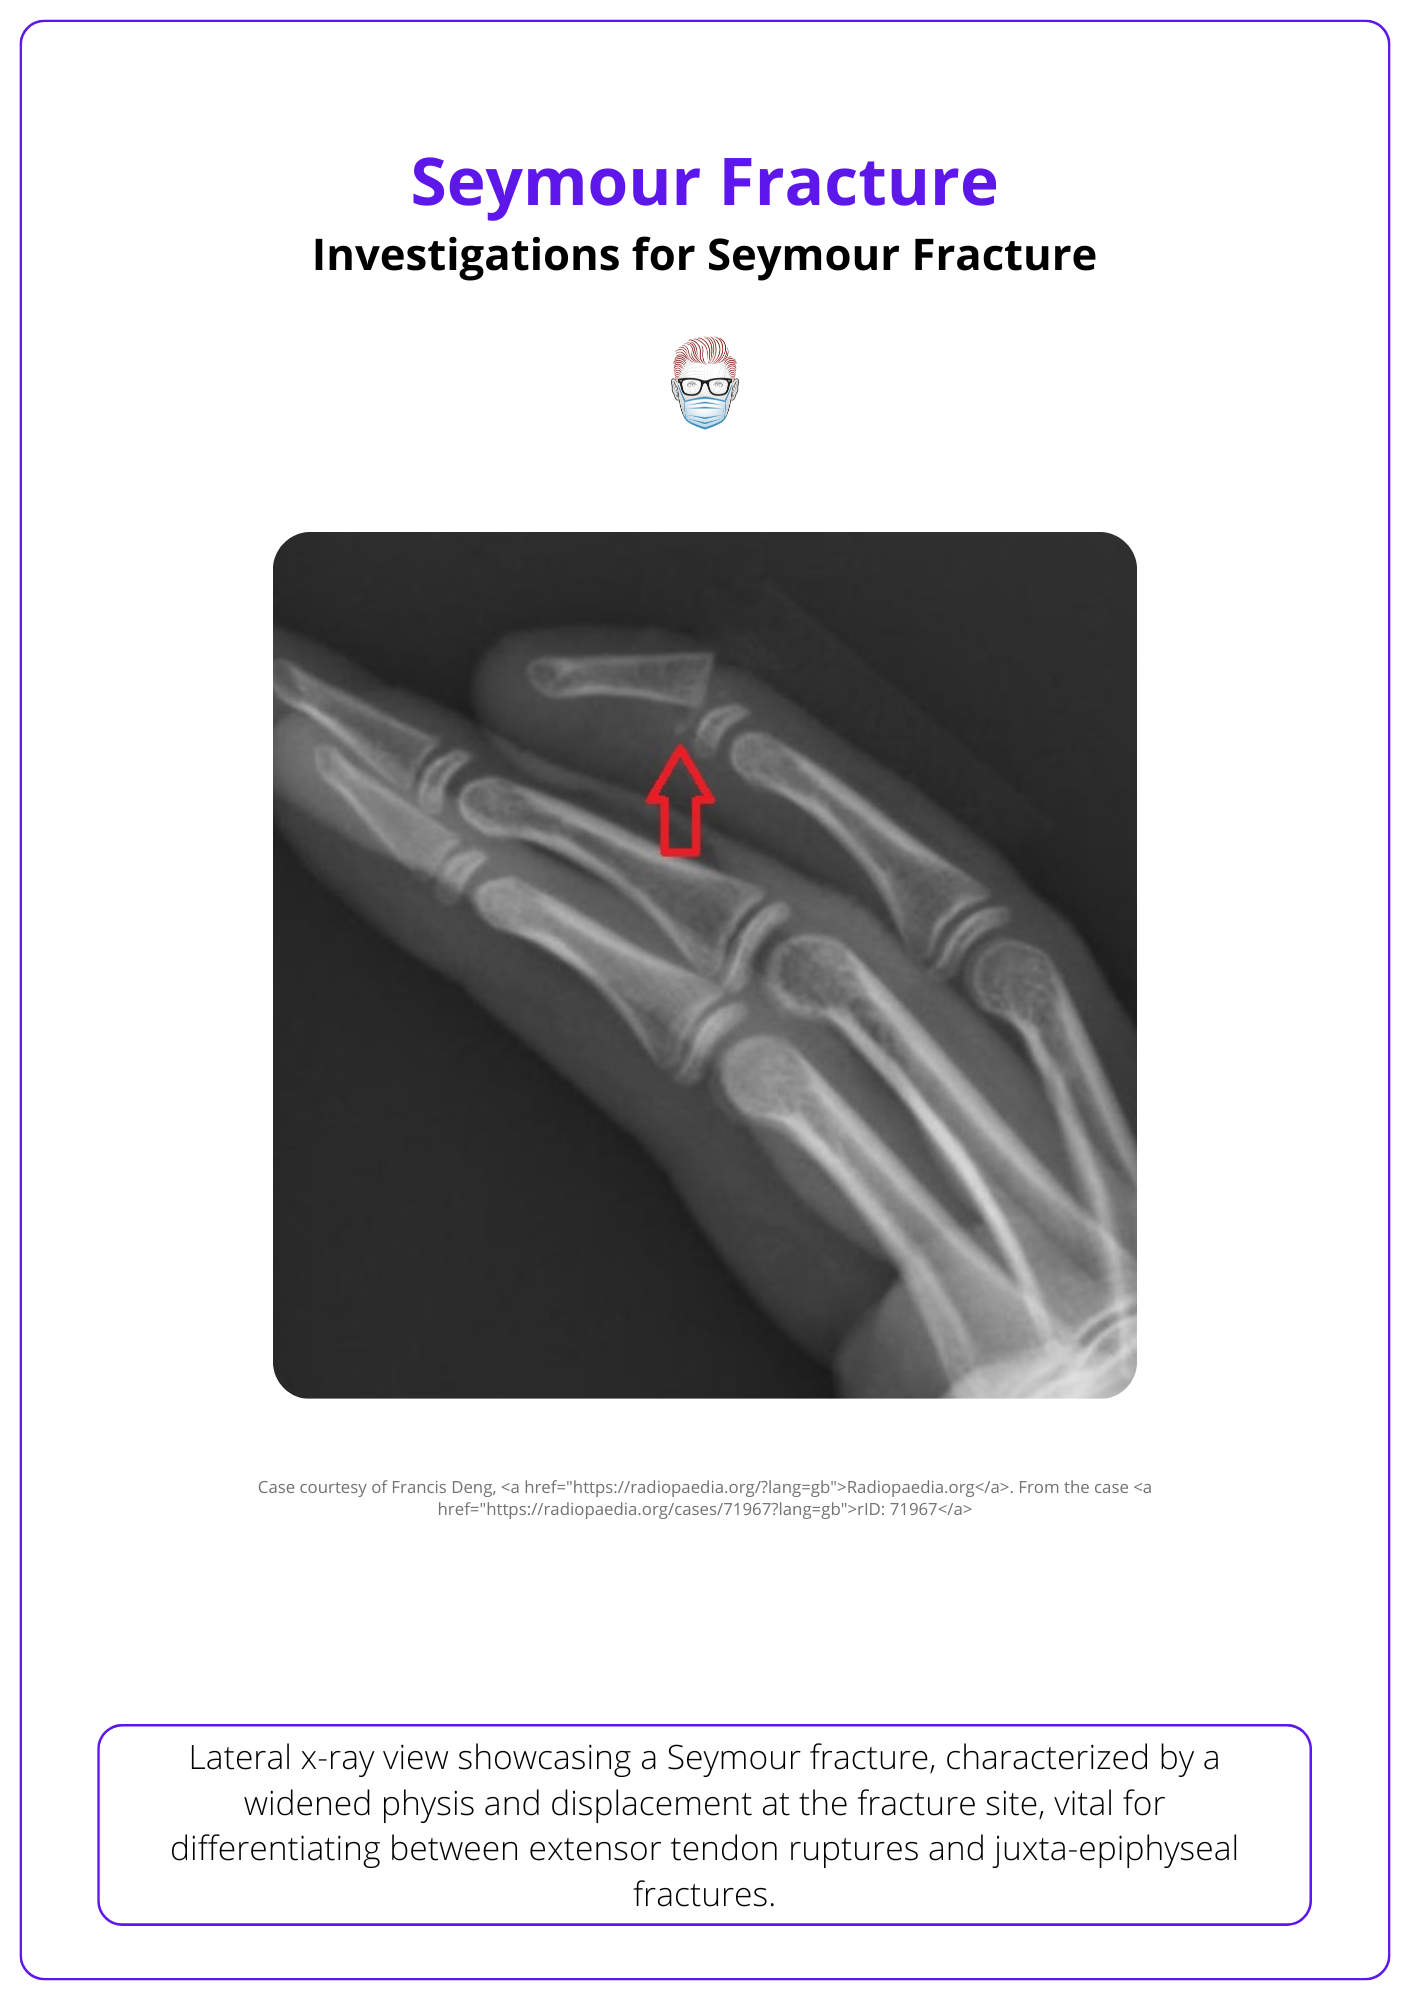 Seymour fracture on the lateral view of an X-ray, Diagnosing Seymour Fracture